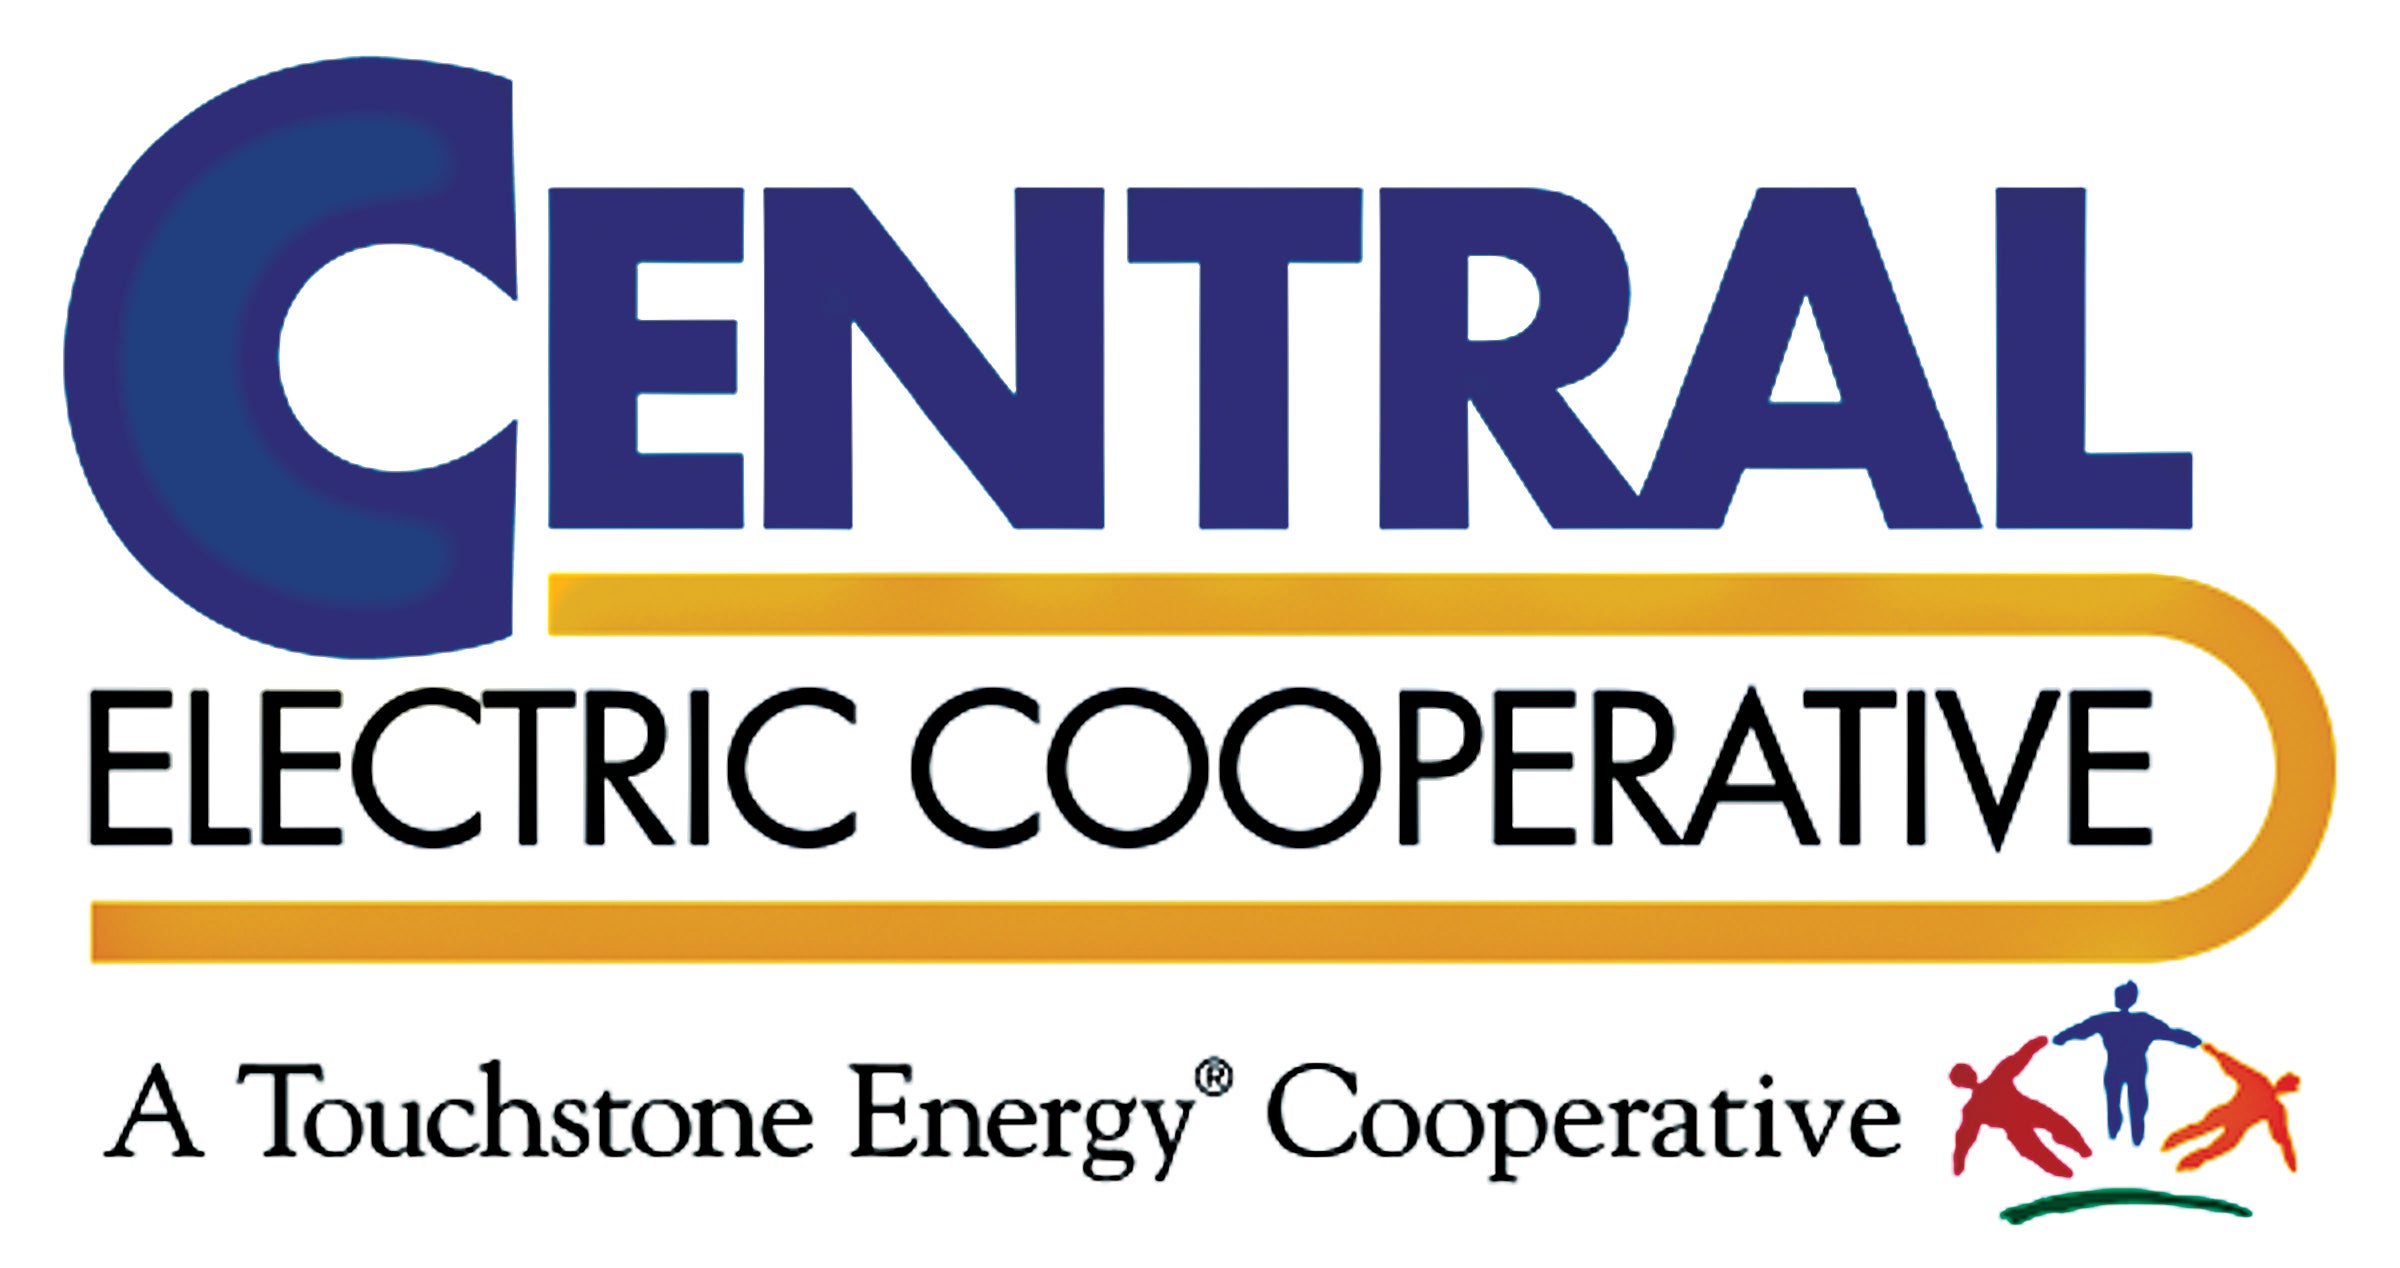 rebates-incentives-central-electric-cooperative